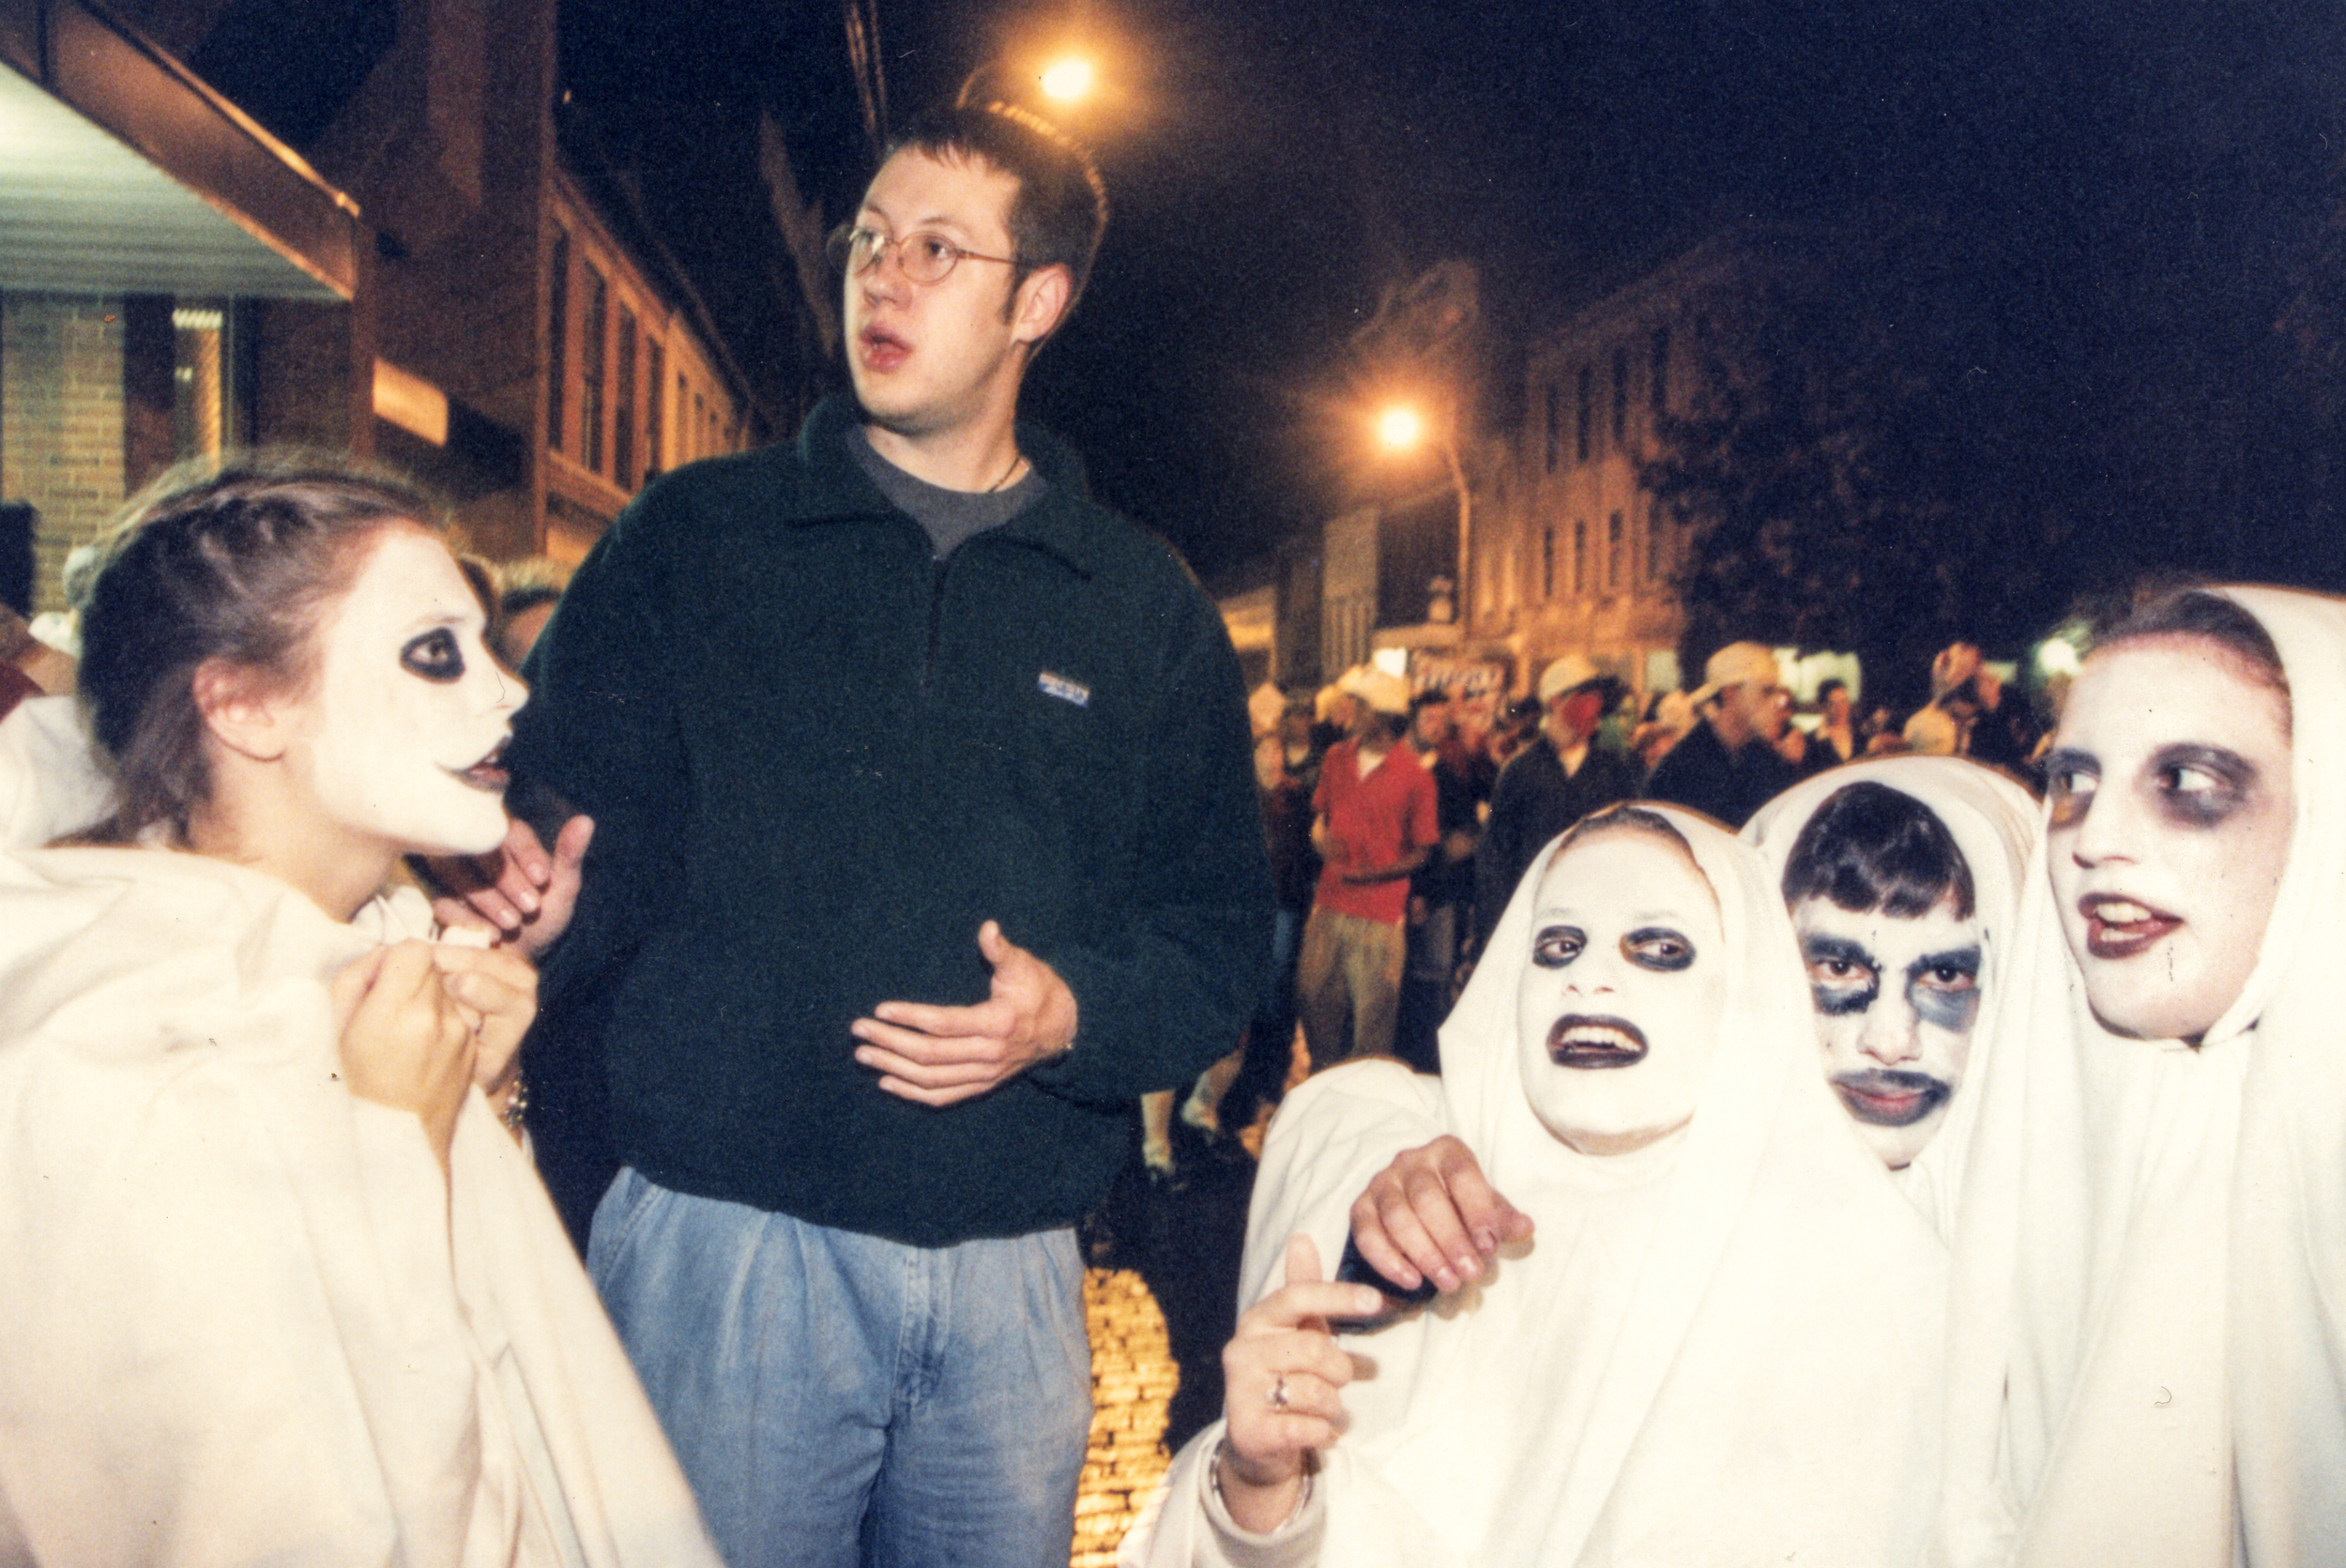  Halloween in Athens, 1997 